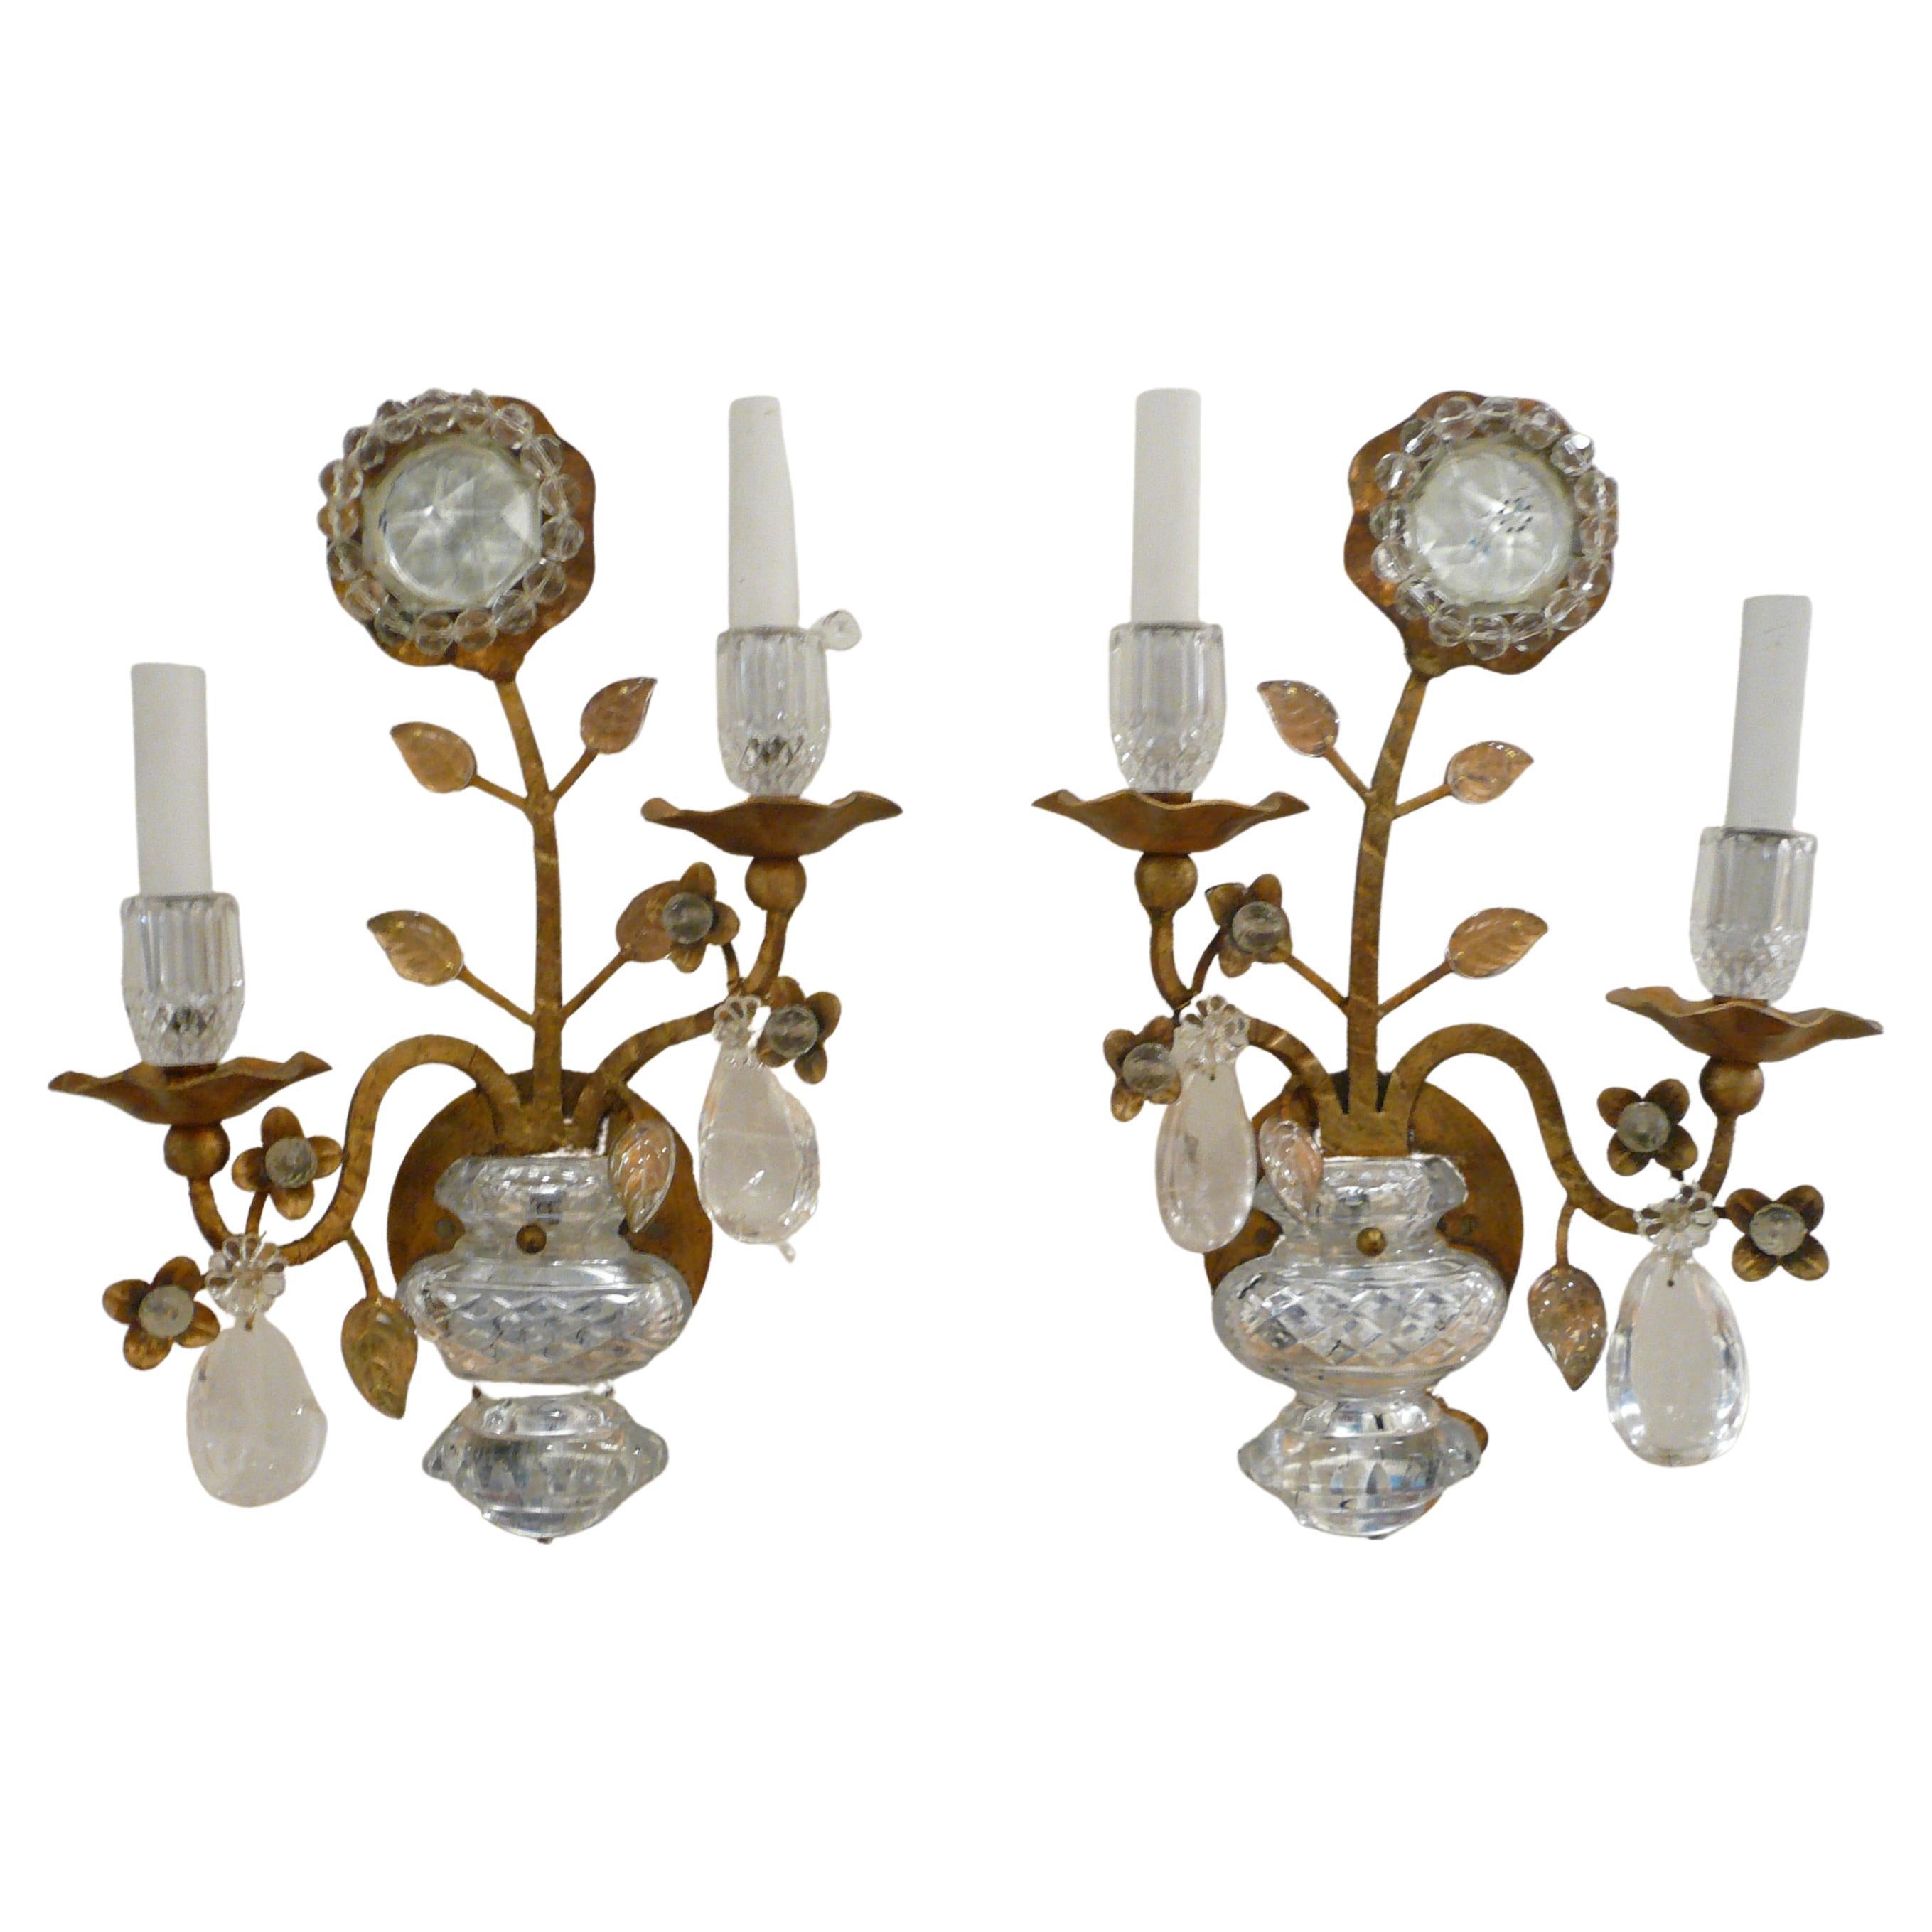 Pair Bagues Style Gilt Metal and Rock Crystal Sconces